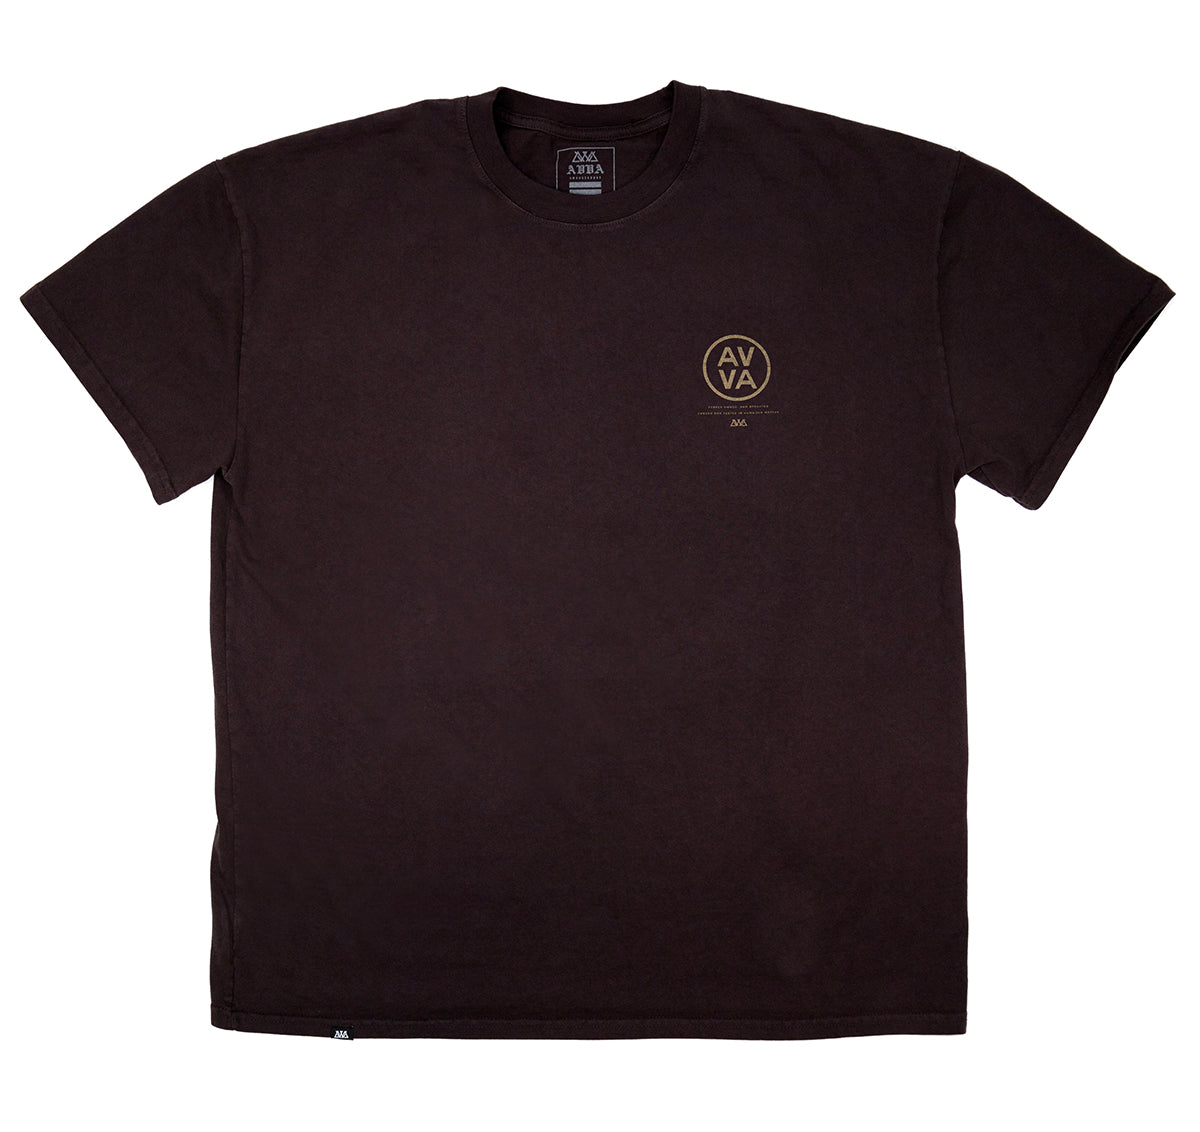 FRONT VIEW OF BROWN HEAVYWEIGHT CREED TEE.